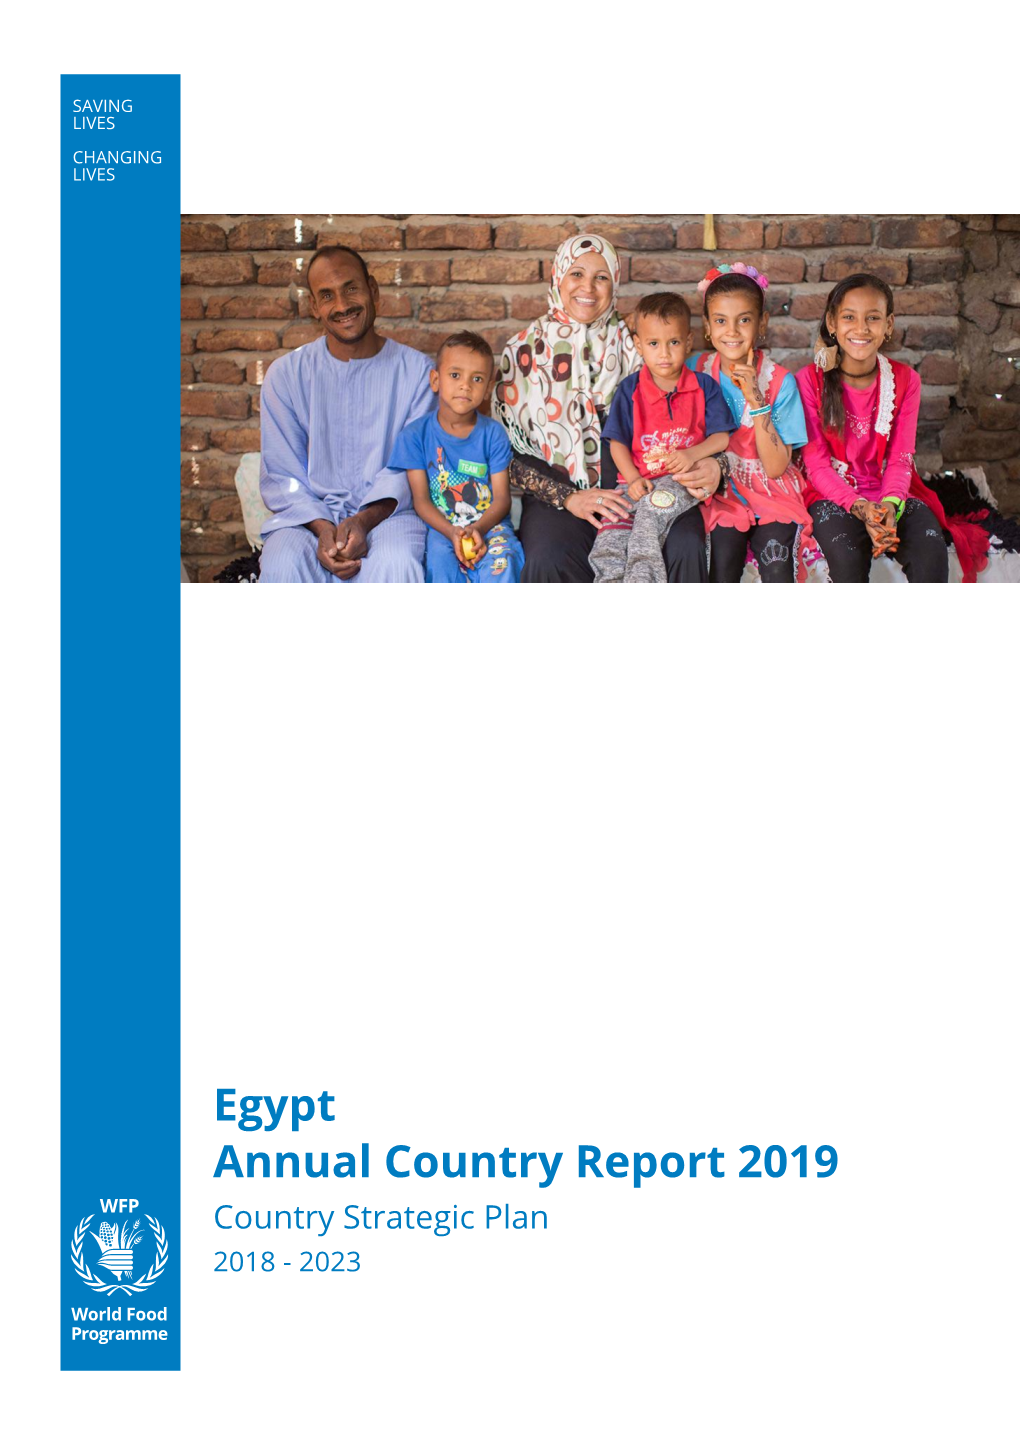 Egypt Annual Country Report 2019 Country Strategic Plan 2018 - 2023 Table of Contents